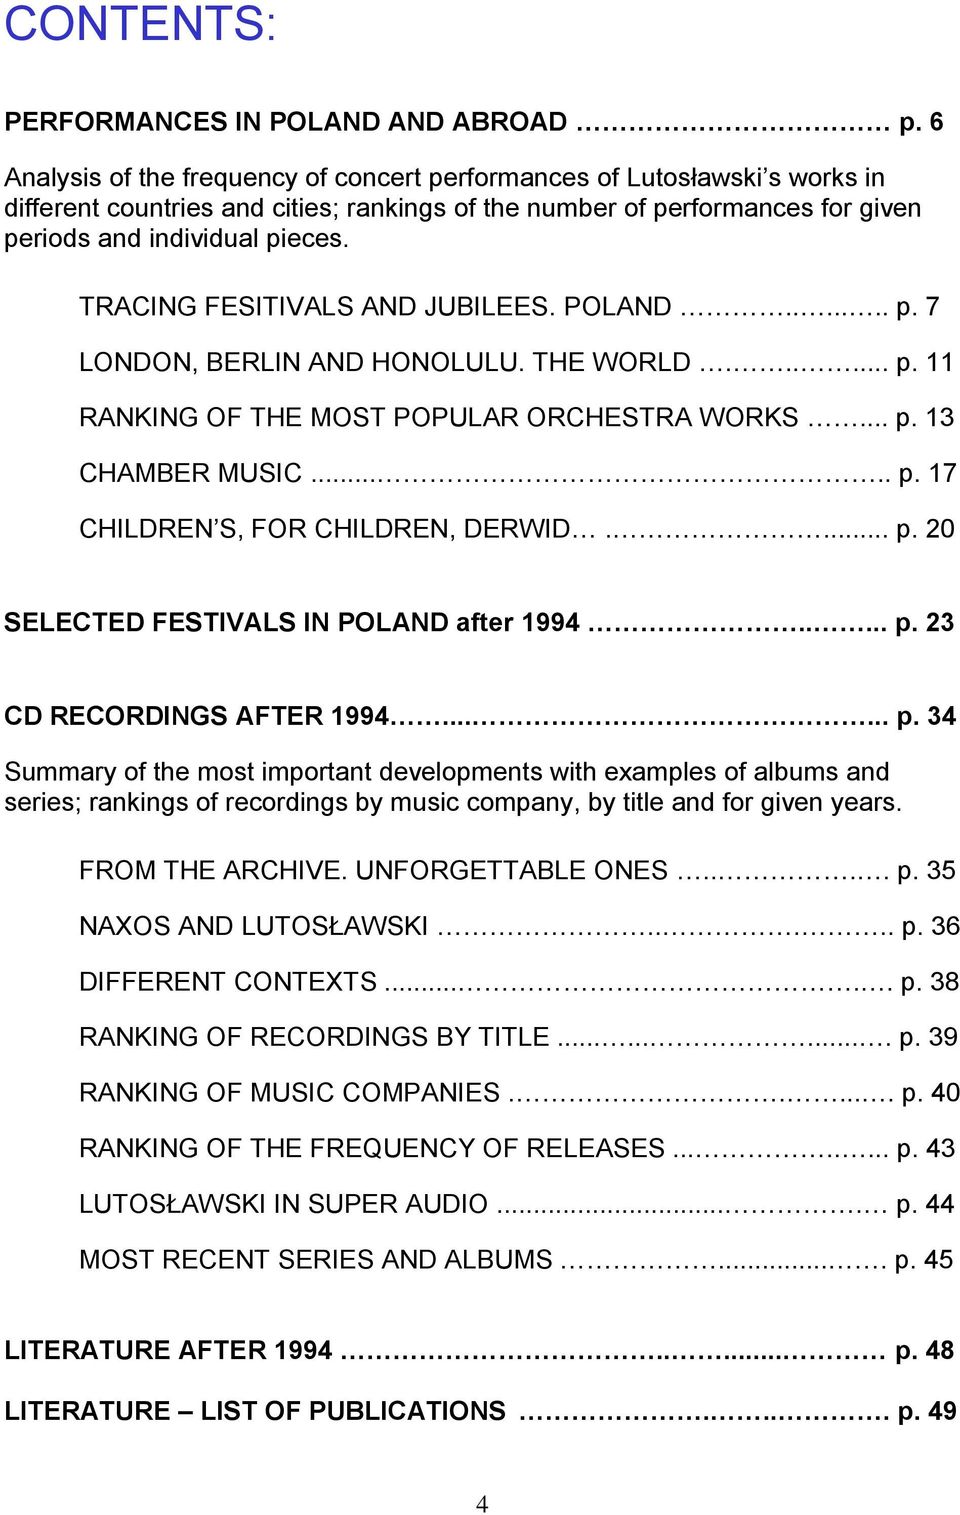 TRACING FESITIVALS AND JUBILEES. POLAND....... p. 7 LONDON, BERLIN AND HONOLULU. THE WORLD...... p. 11 RANKING OF THE MOST POPULAR ORCHESTRA WORKS... p. 13 CHAMBER MUSIC..... p. 17 CHILDREN S, FOR CHILDREN, DERWID.